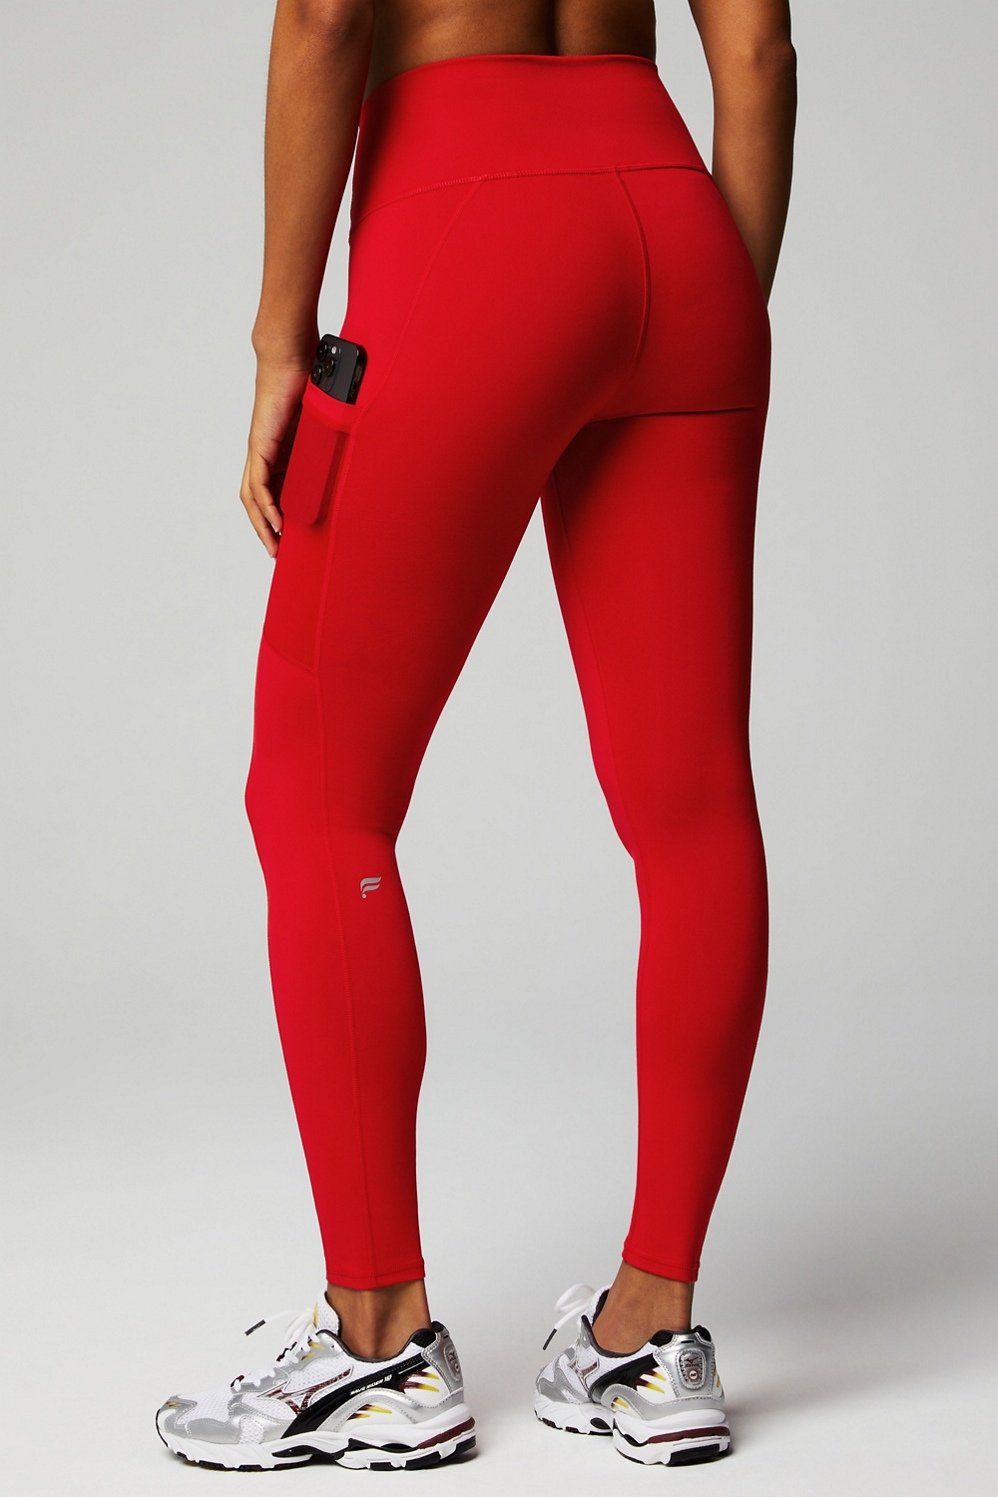 Red Sequins High Waisted Yoga Leggings / Work Out Gym Leggings